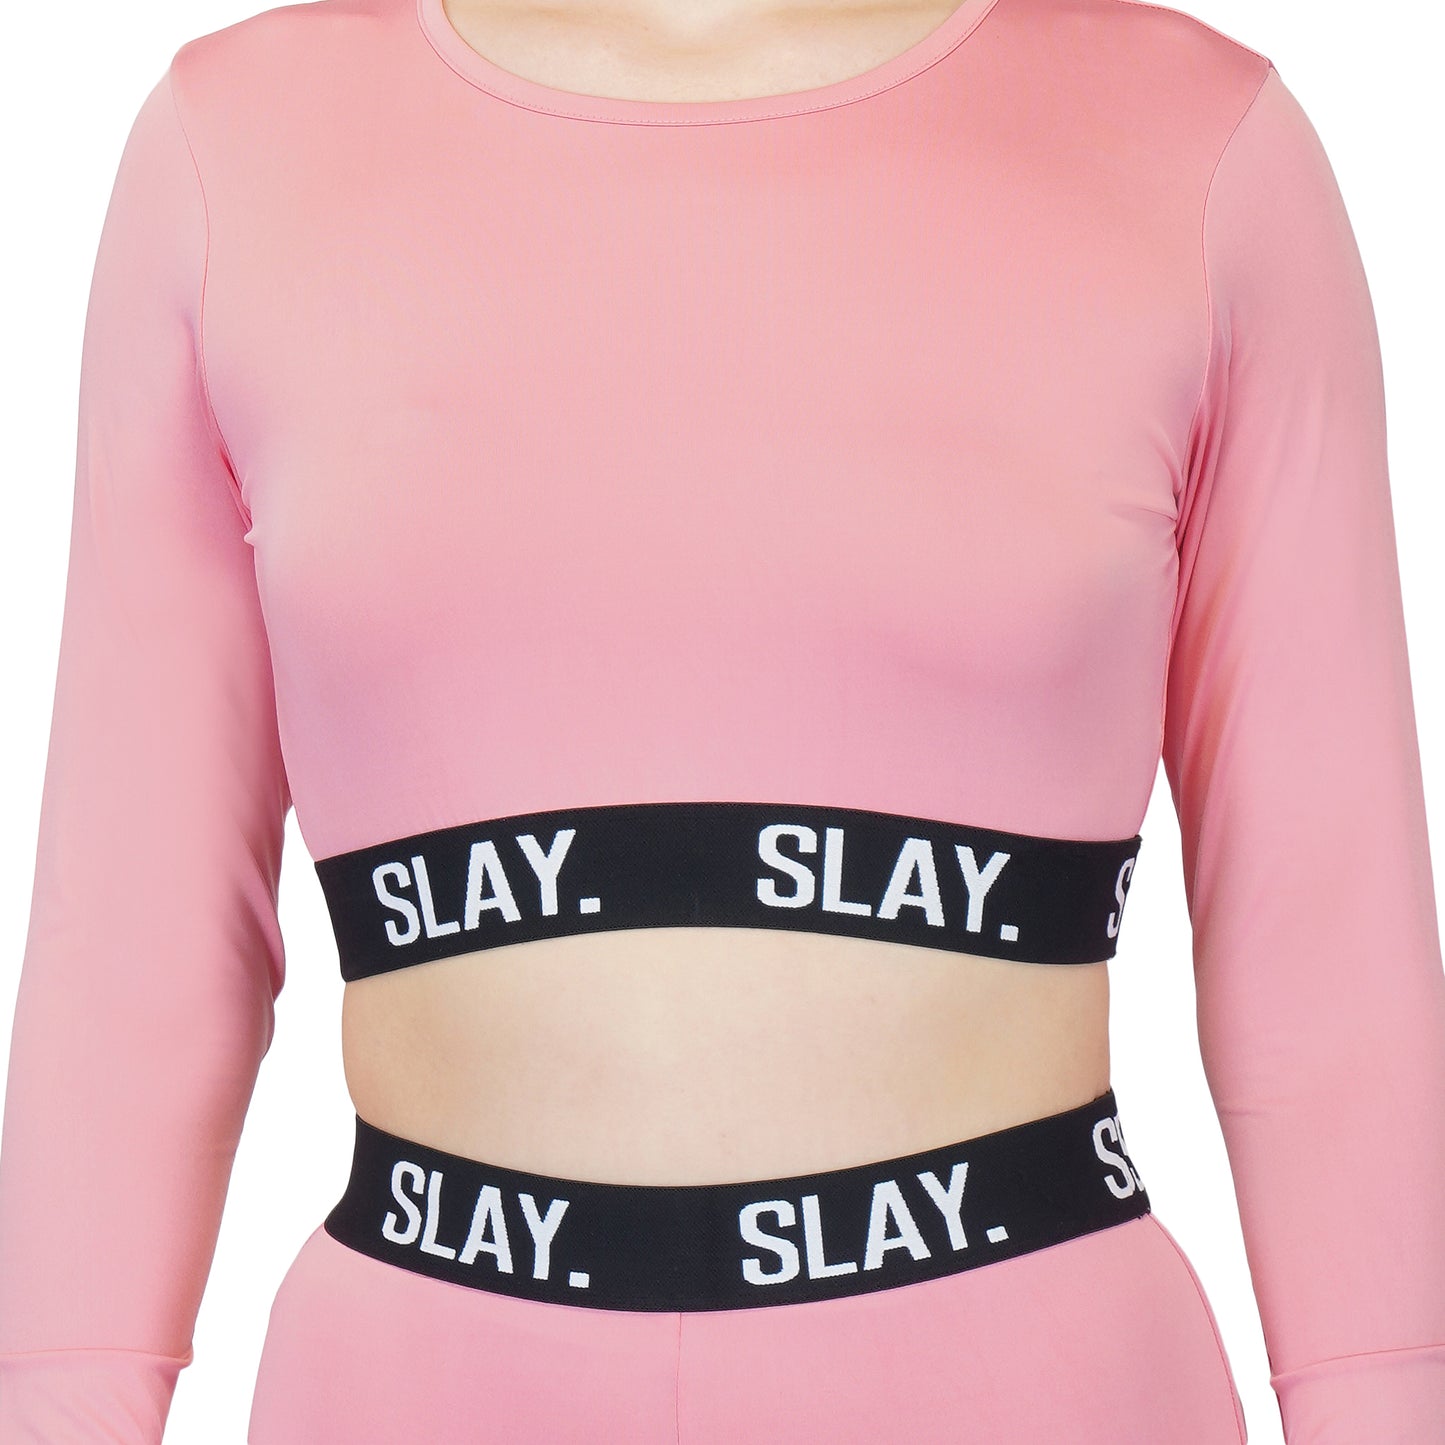 SLAY. Sport Women's Activewear Full Sleeves Crop Top And Pants Co-ord Set Pink